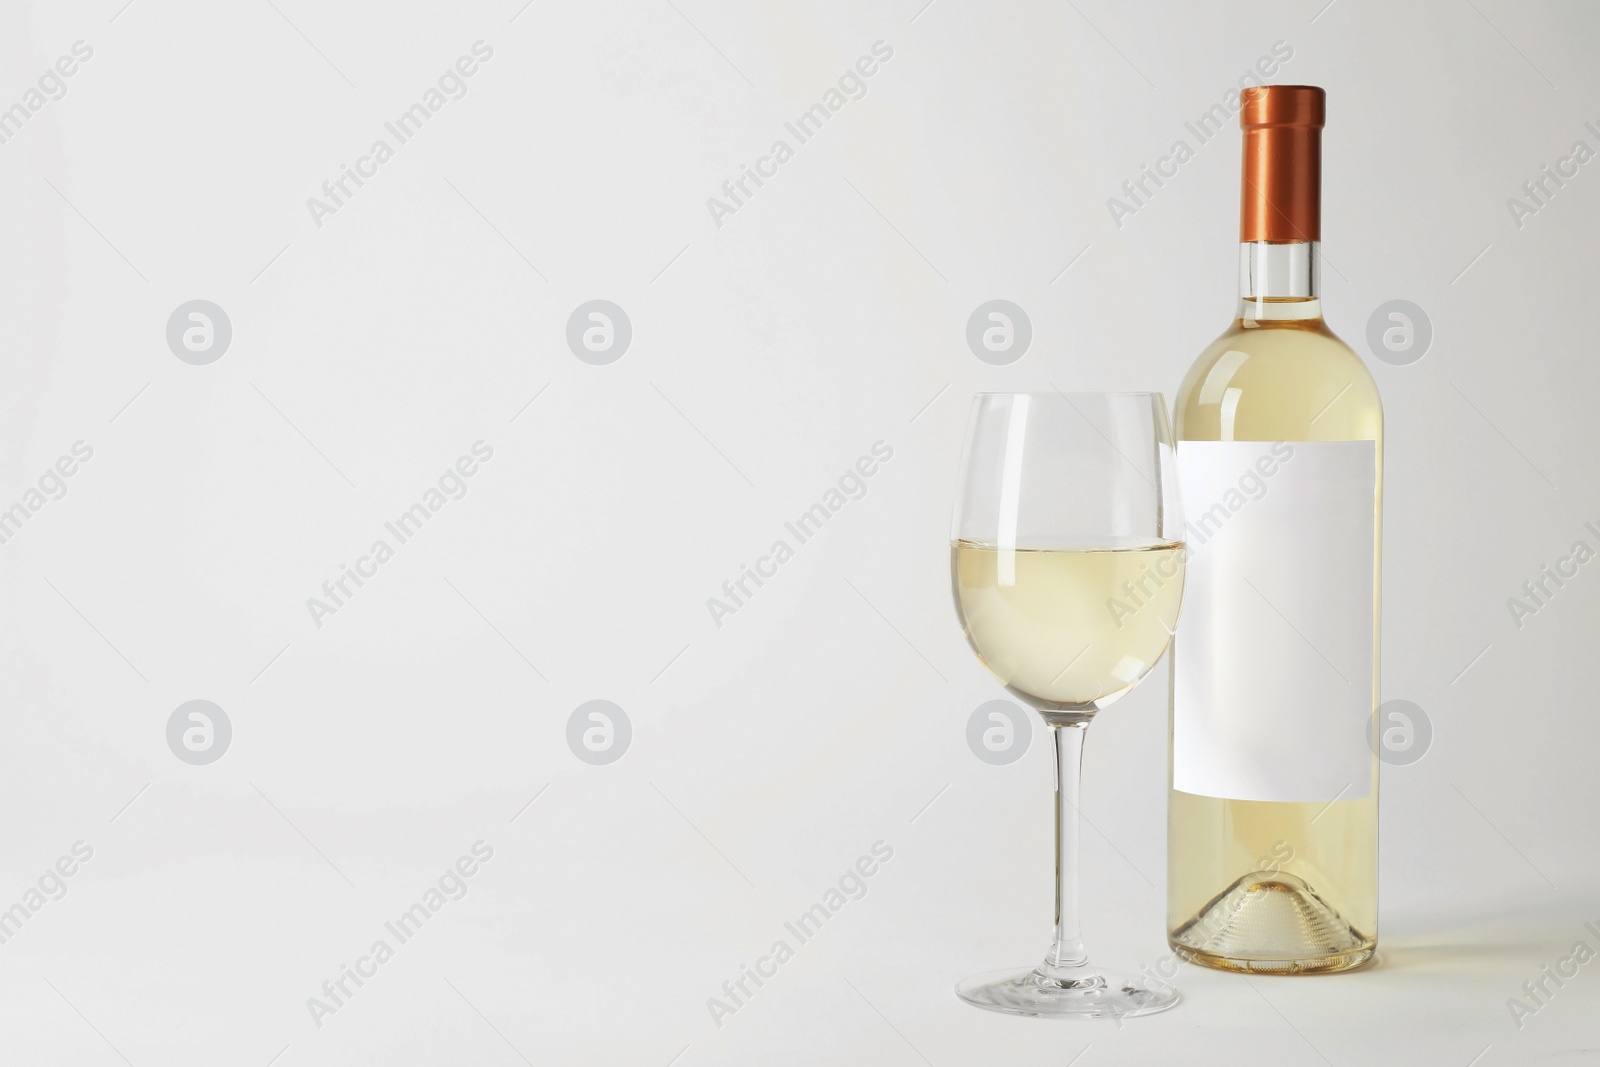 Photo of Bottle and glass with delicious wine on white background